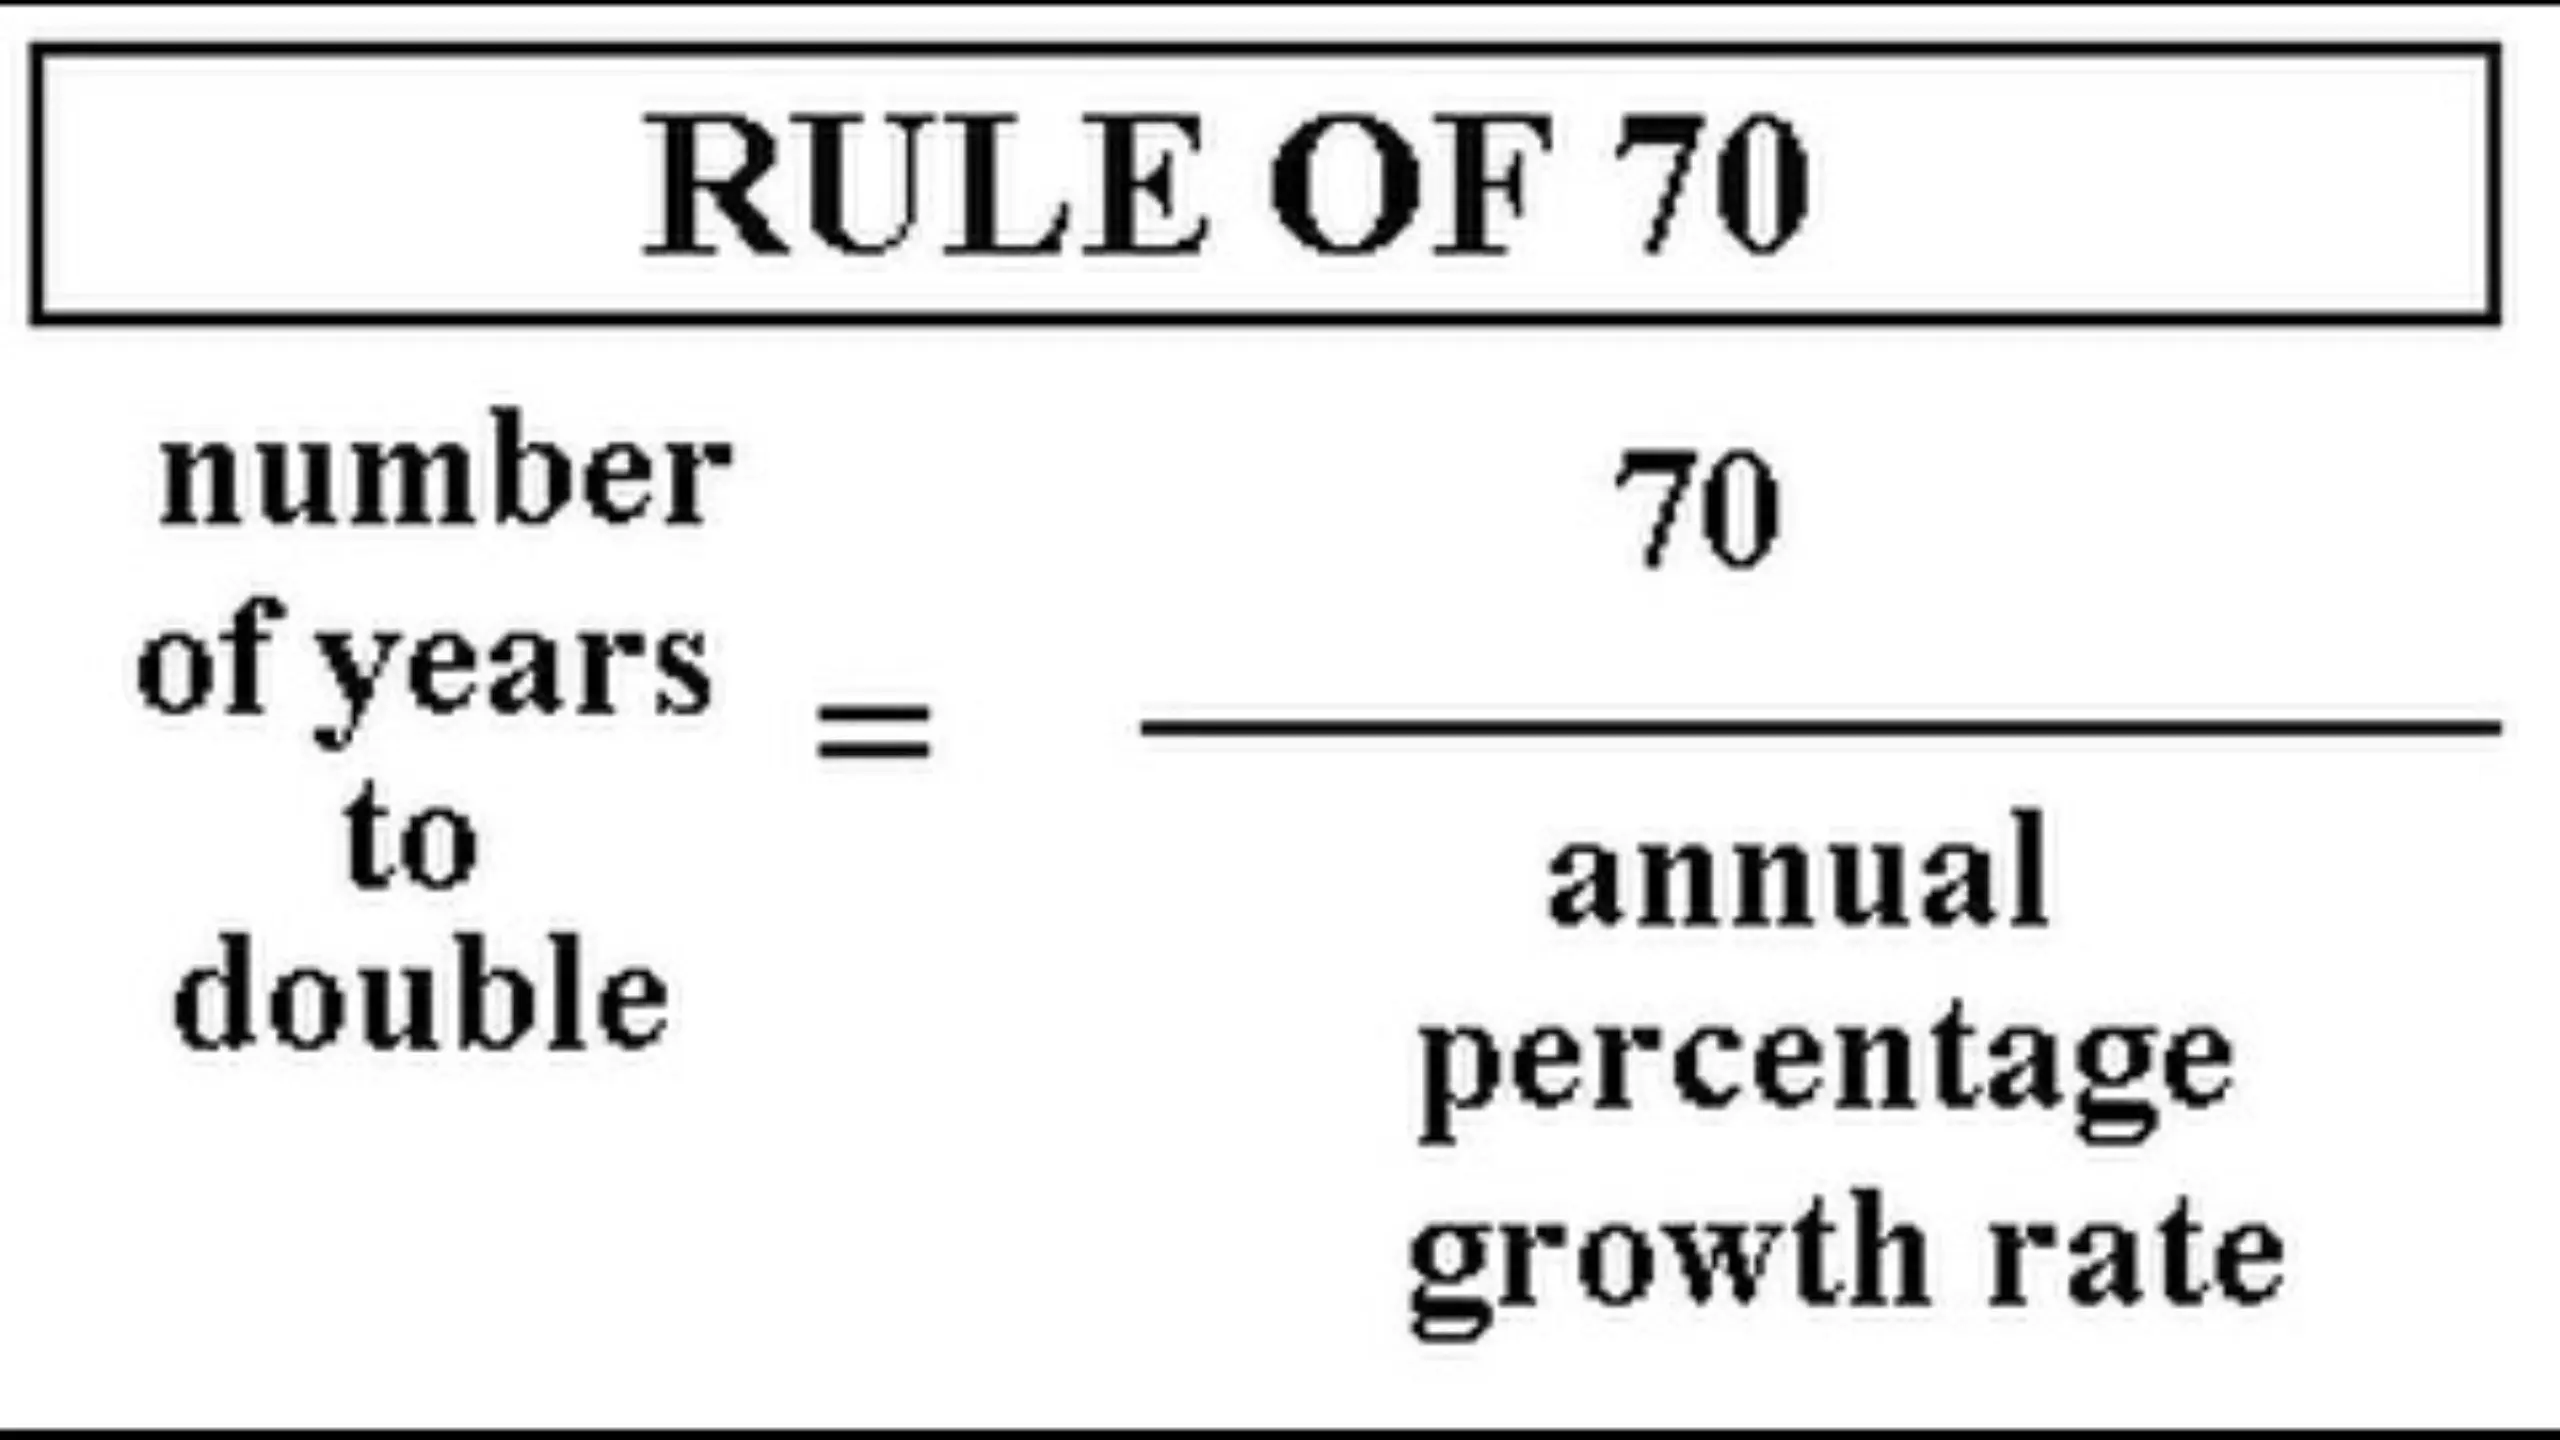 The Rule of 70